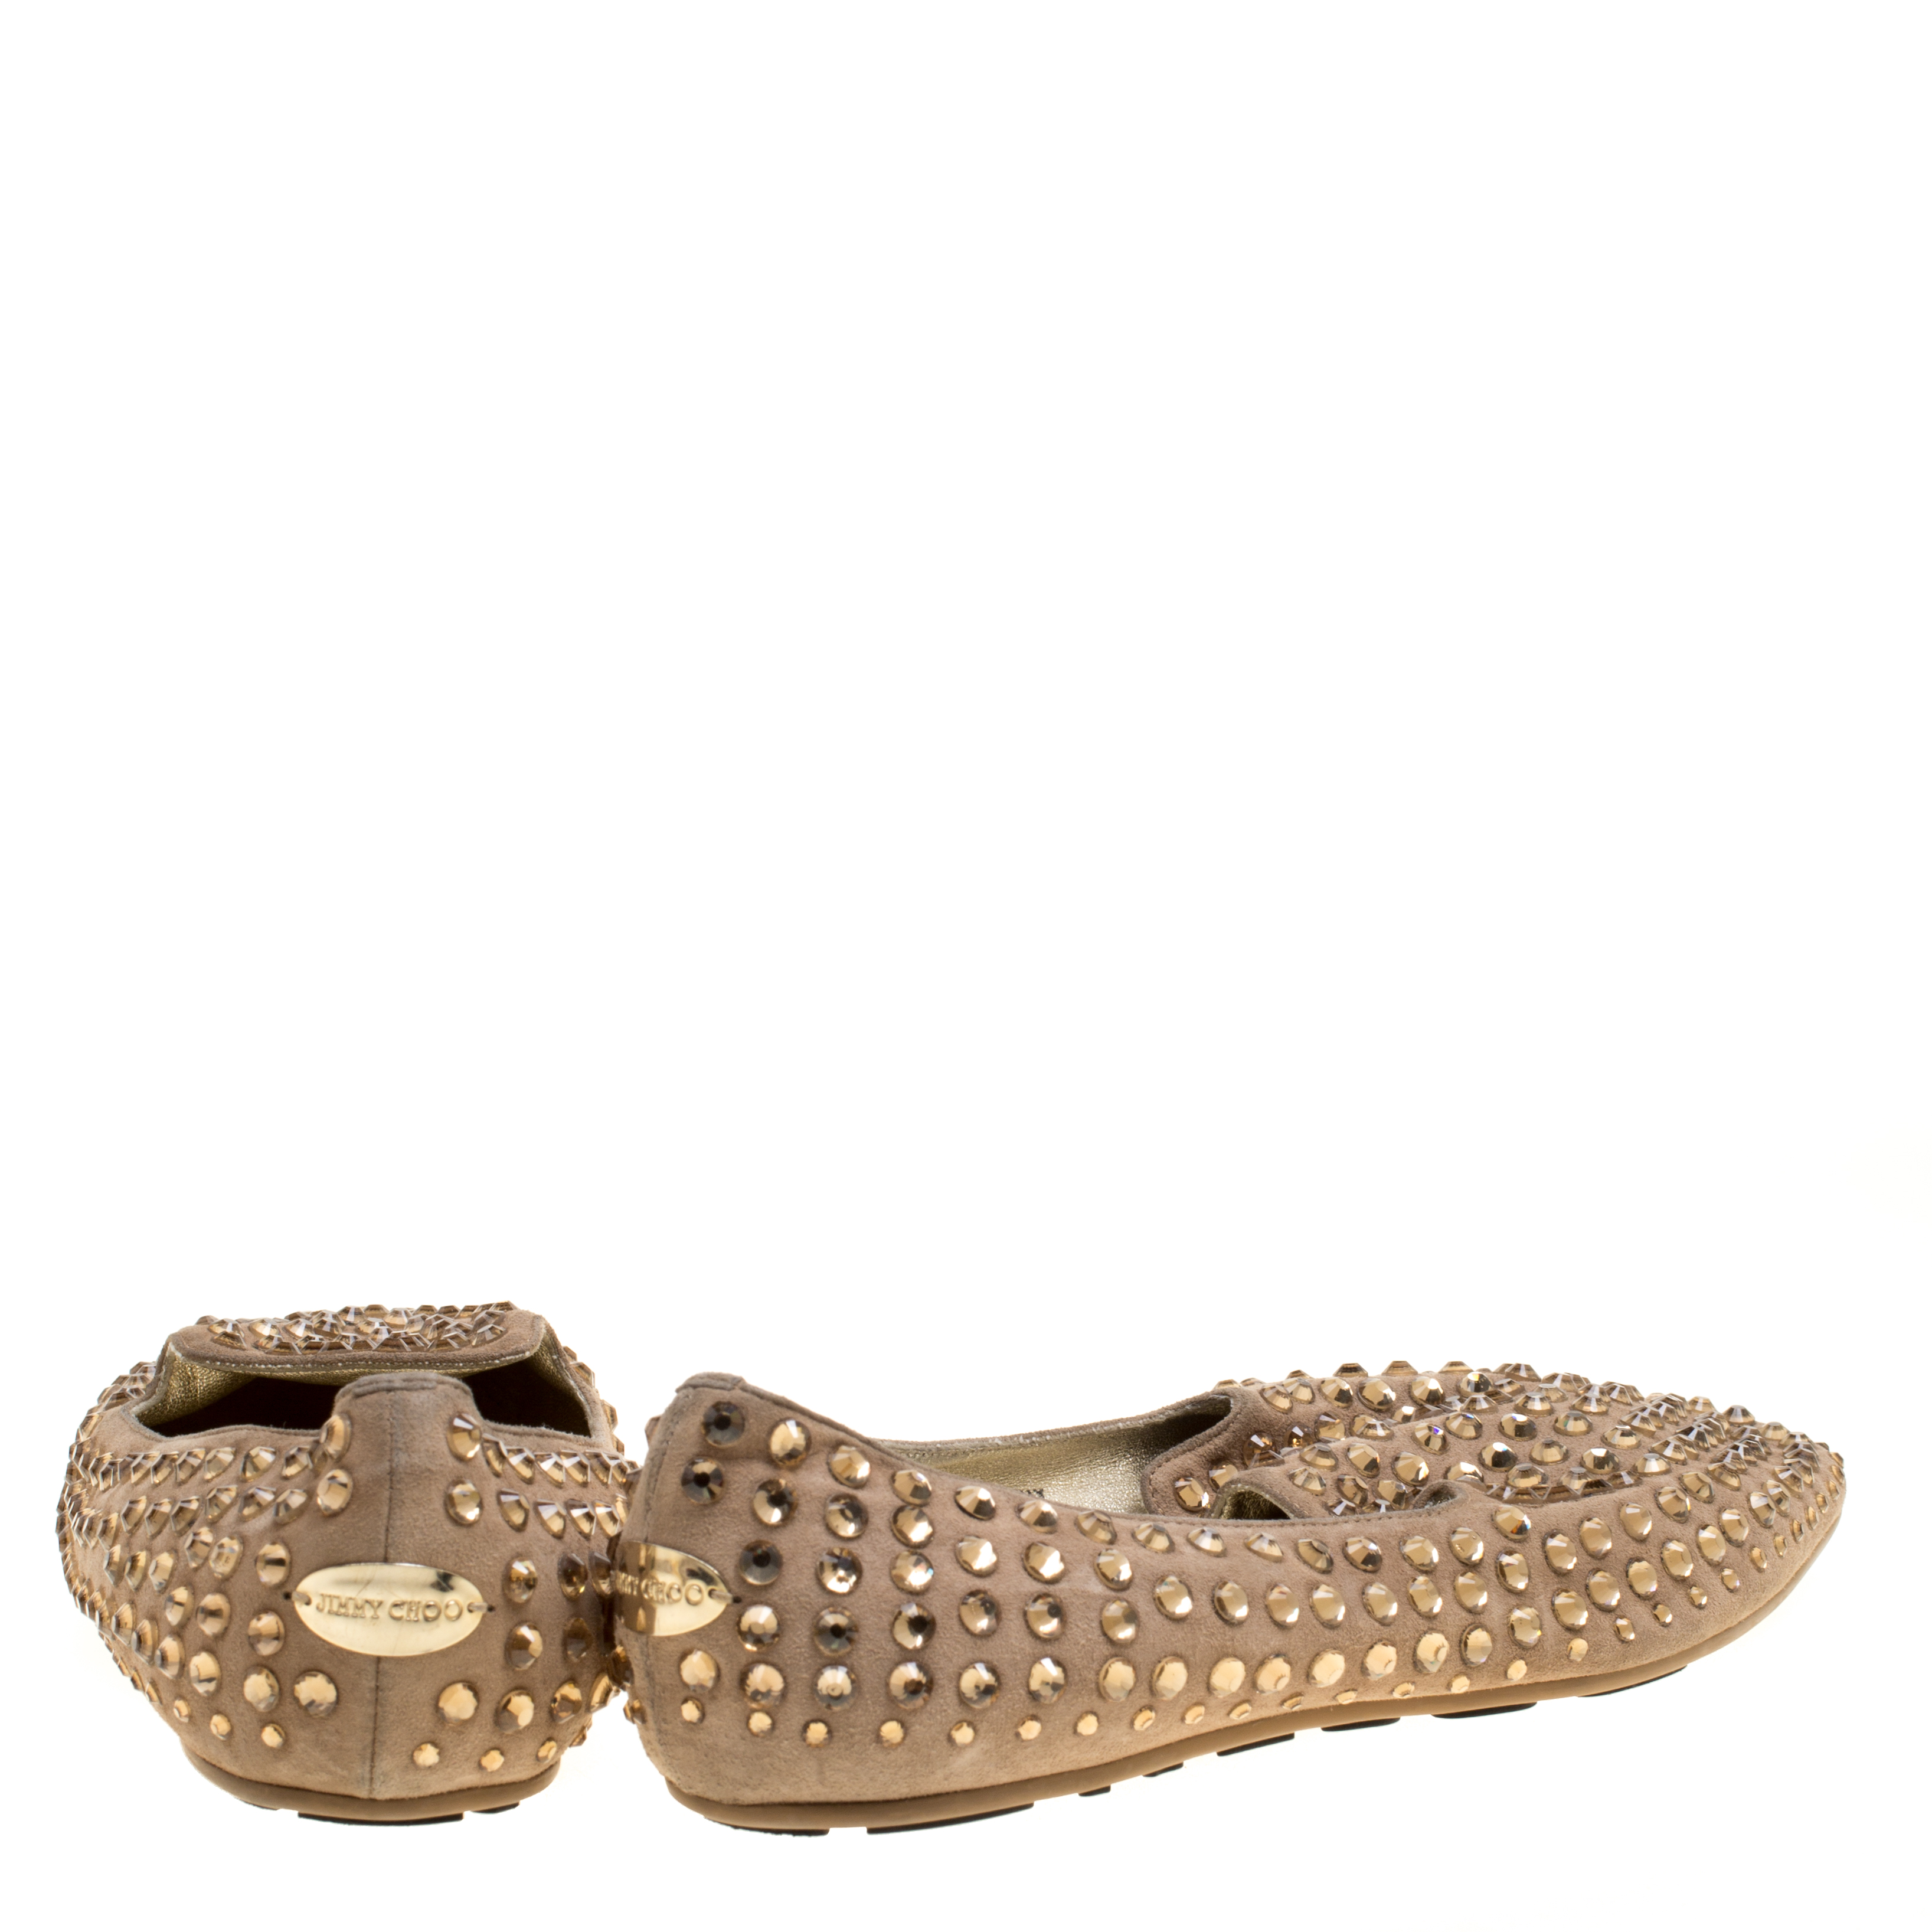 Pre-owned Jimmy Choo Beige Suede Wheel Crystal Studded Smoking Slippers Size 38.5